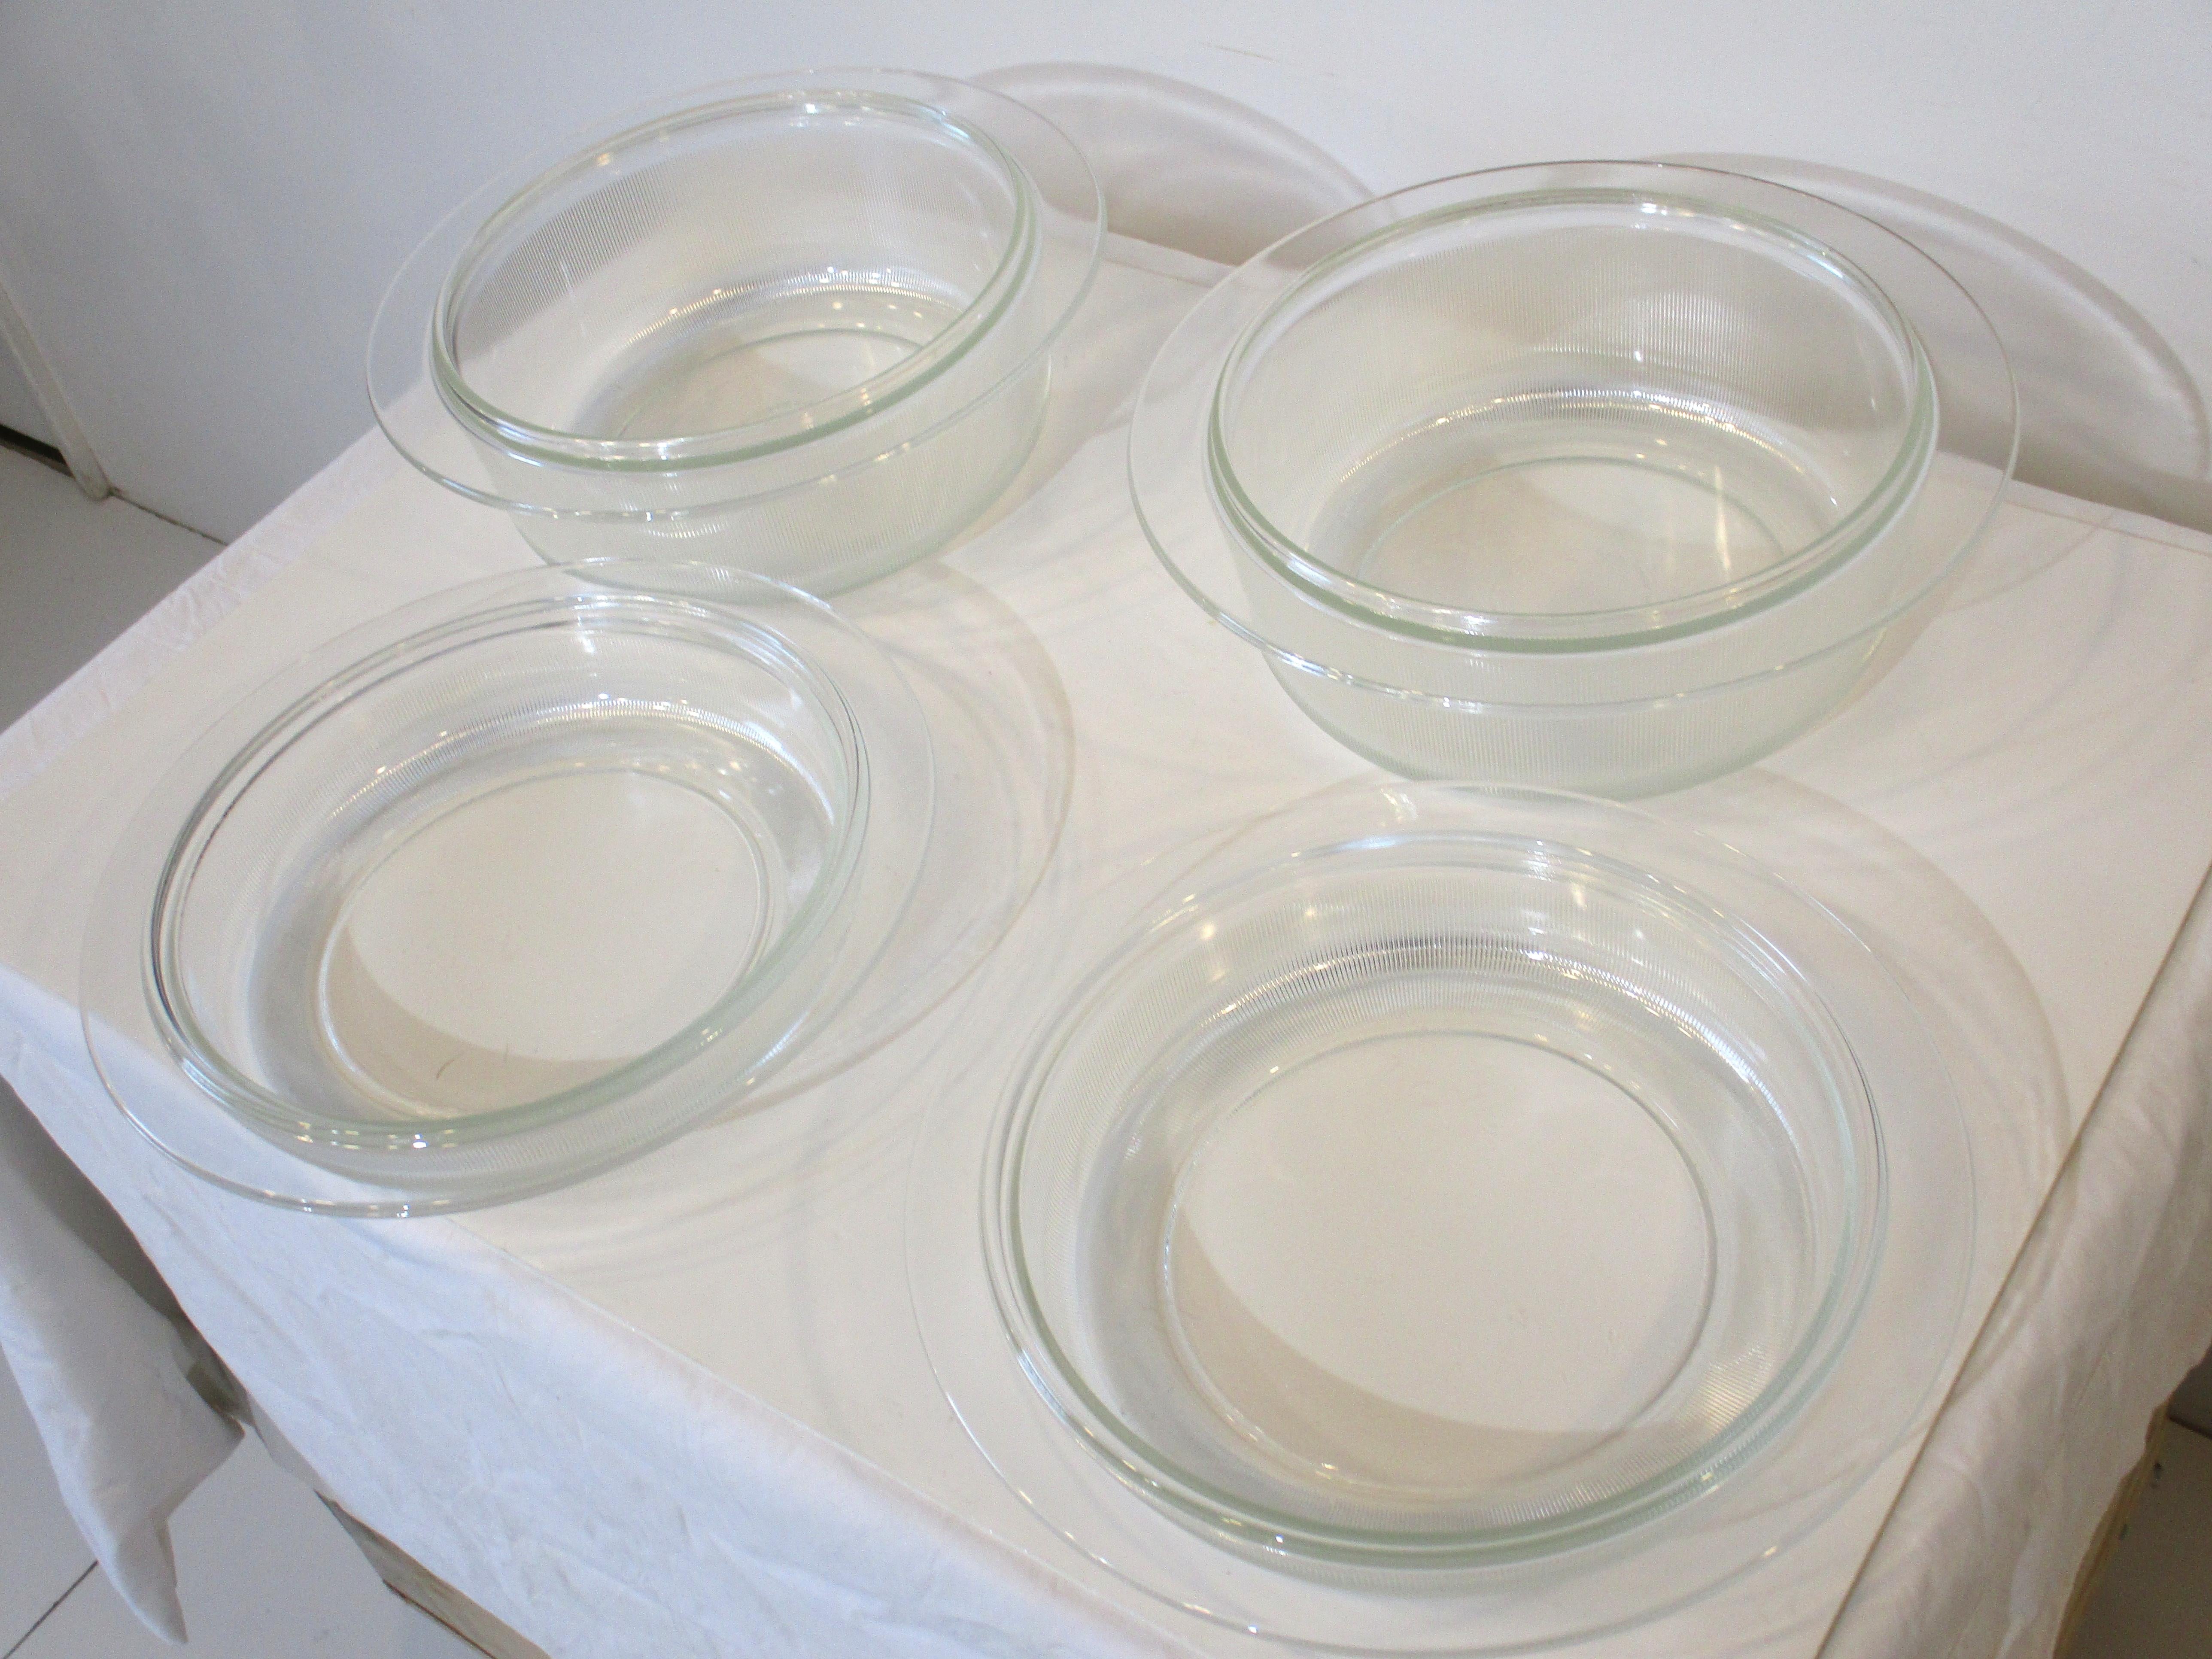 Heller 3 Quart Glass Bakeware with Lids by L & M Vignelli In Good Condition For Sale In Cincinnati, OH